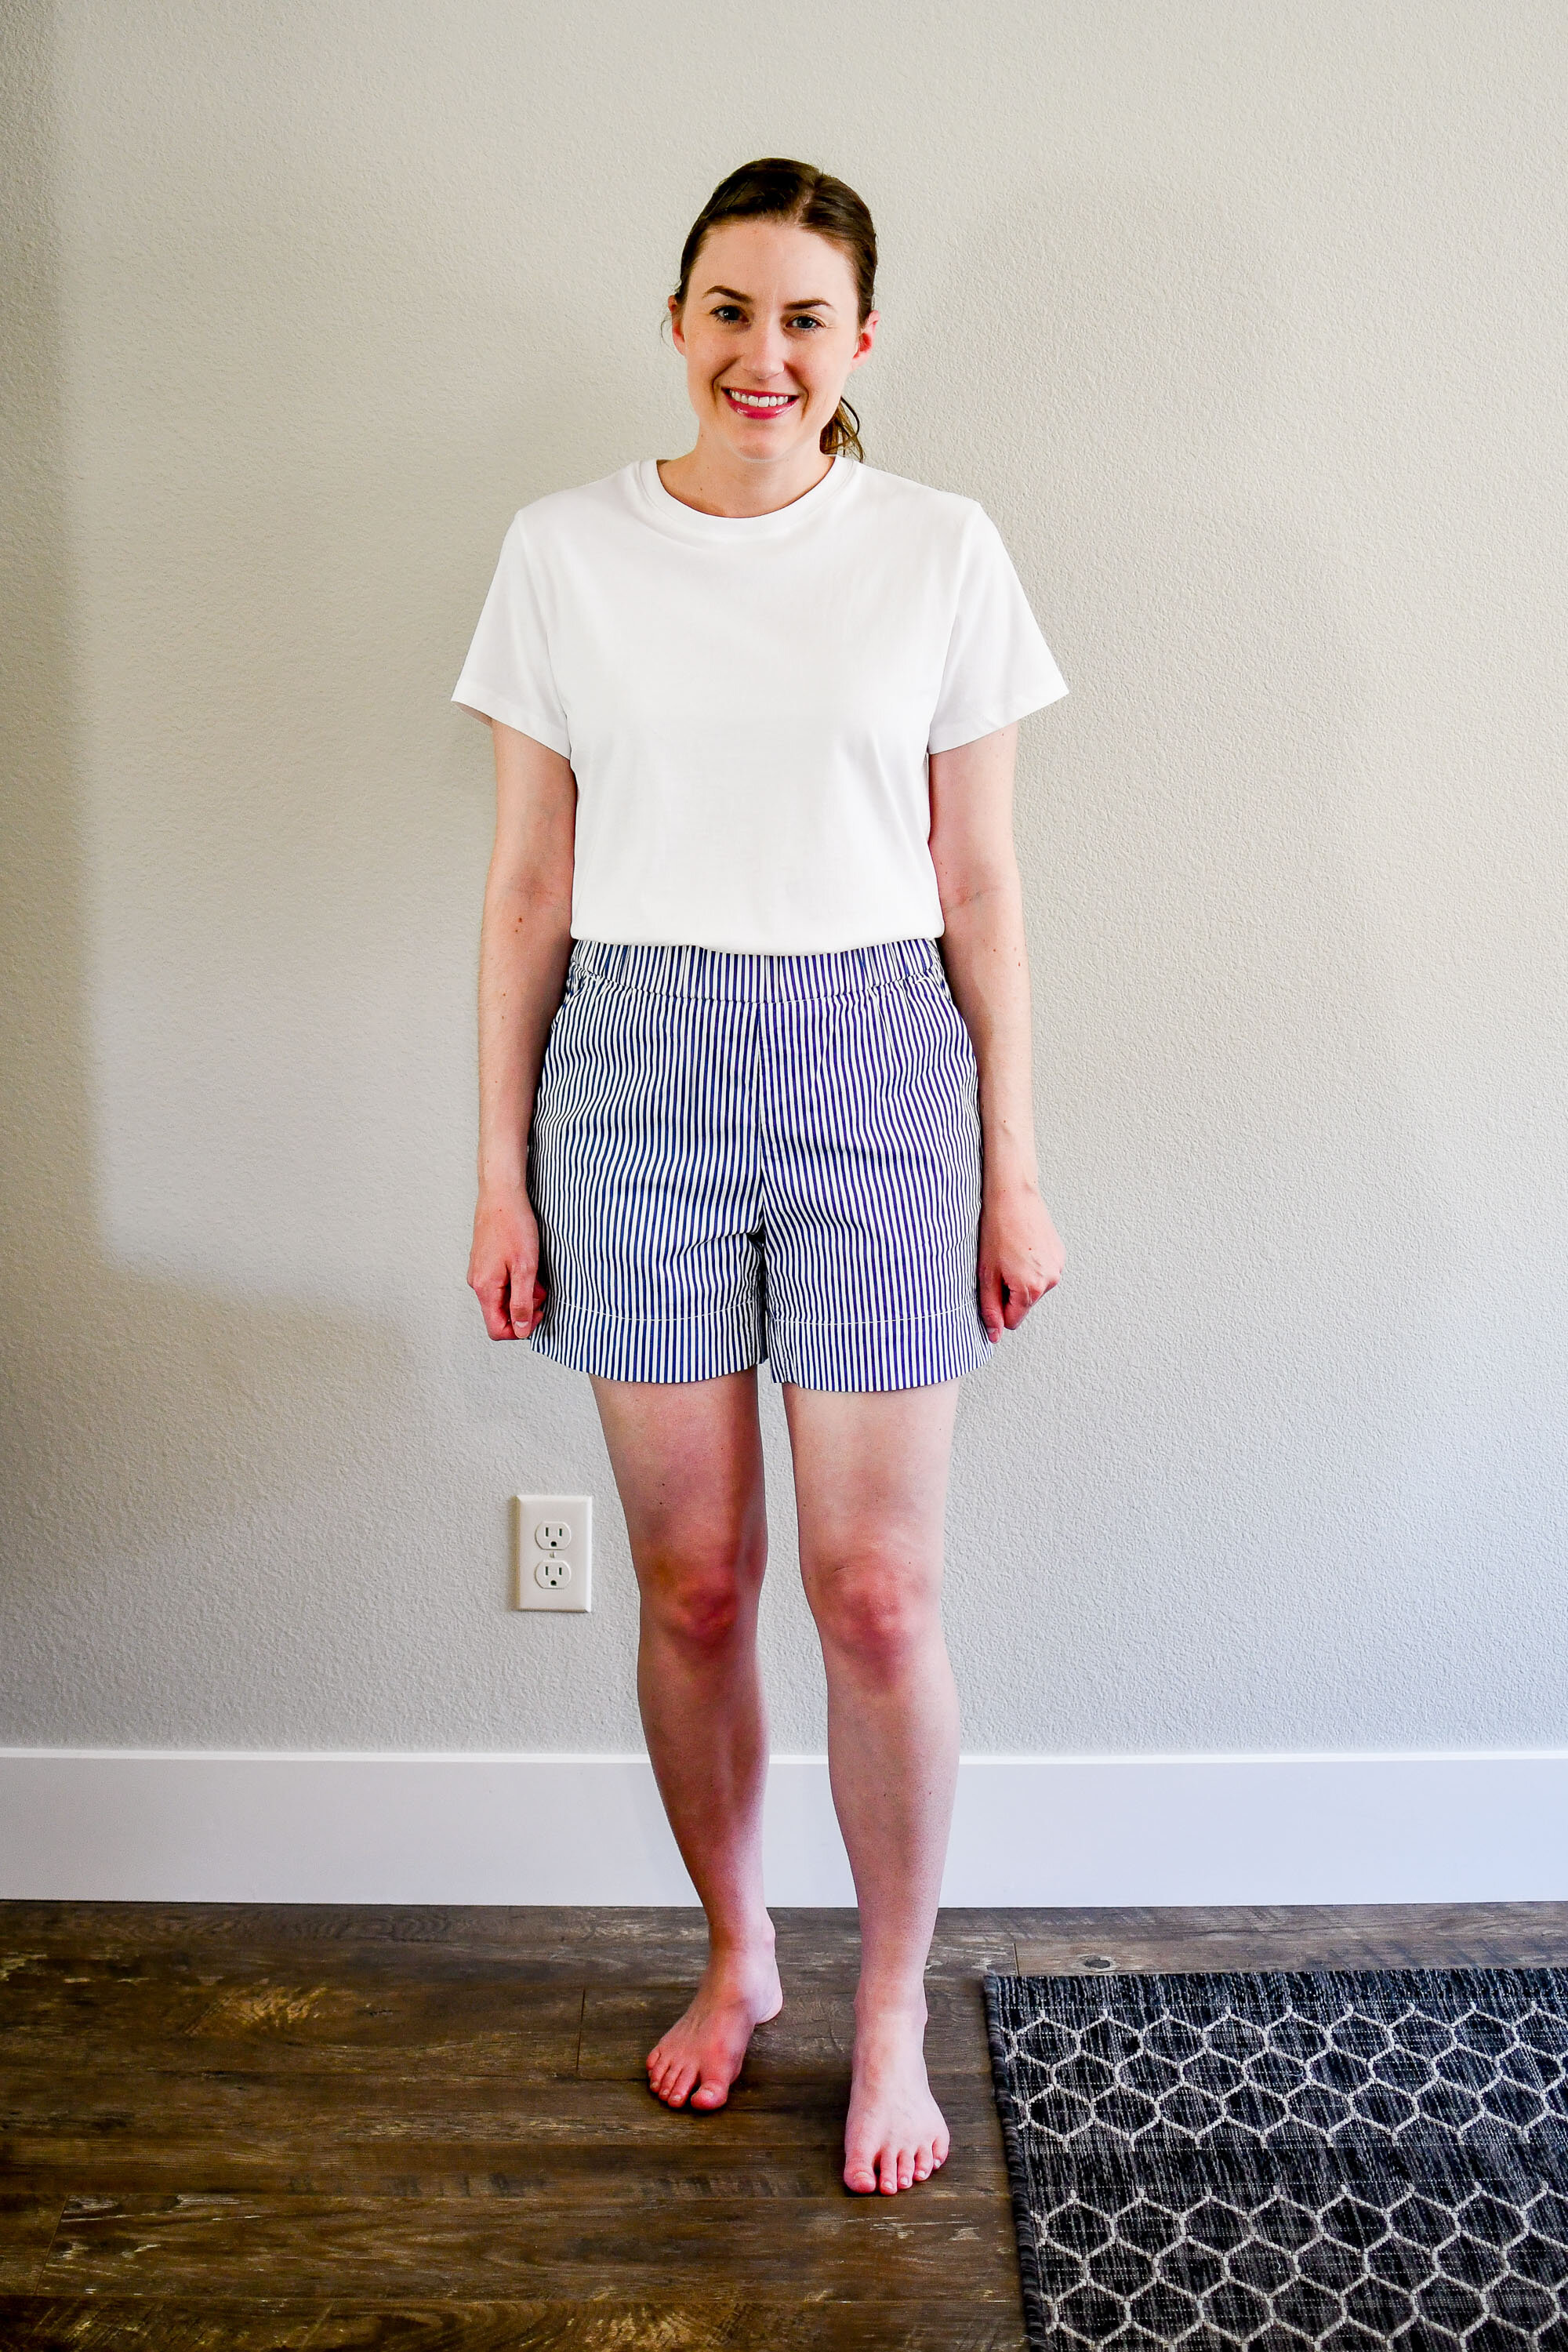 Everlane Reviews: Organic and Silky Cotton Tees, Easy Short